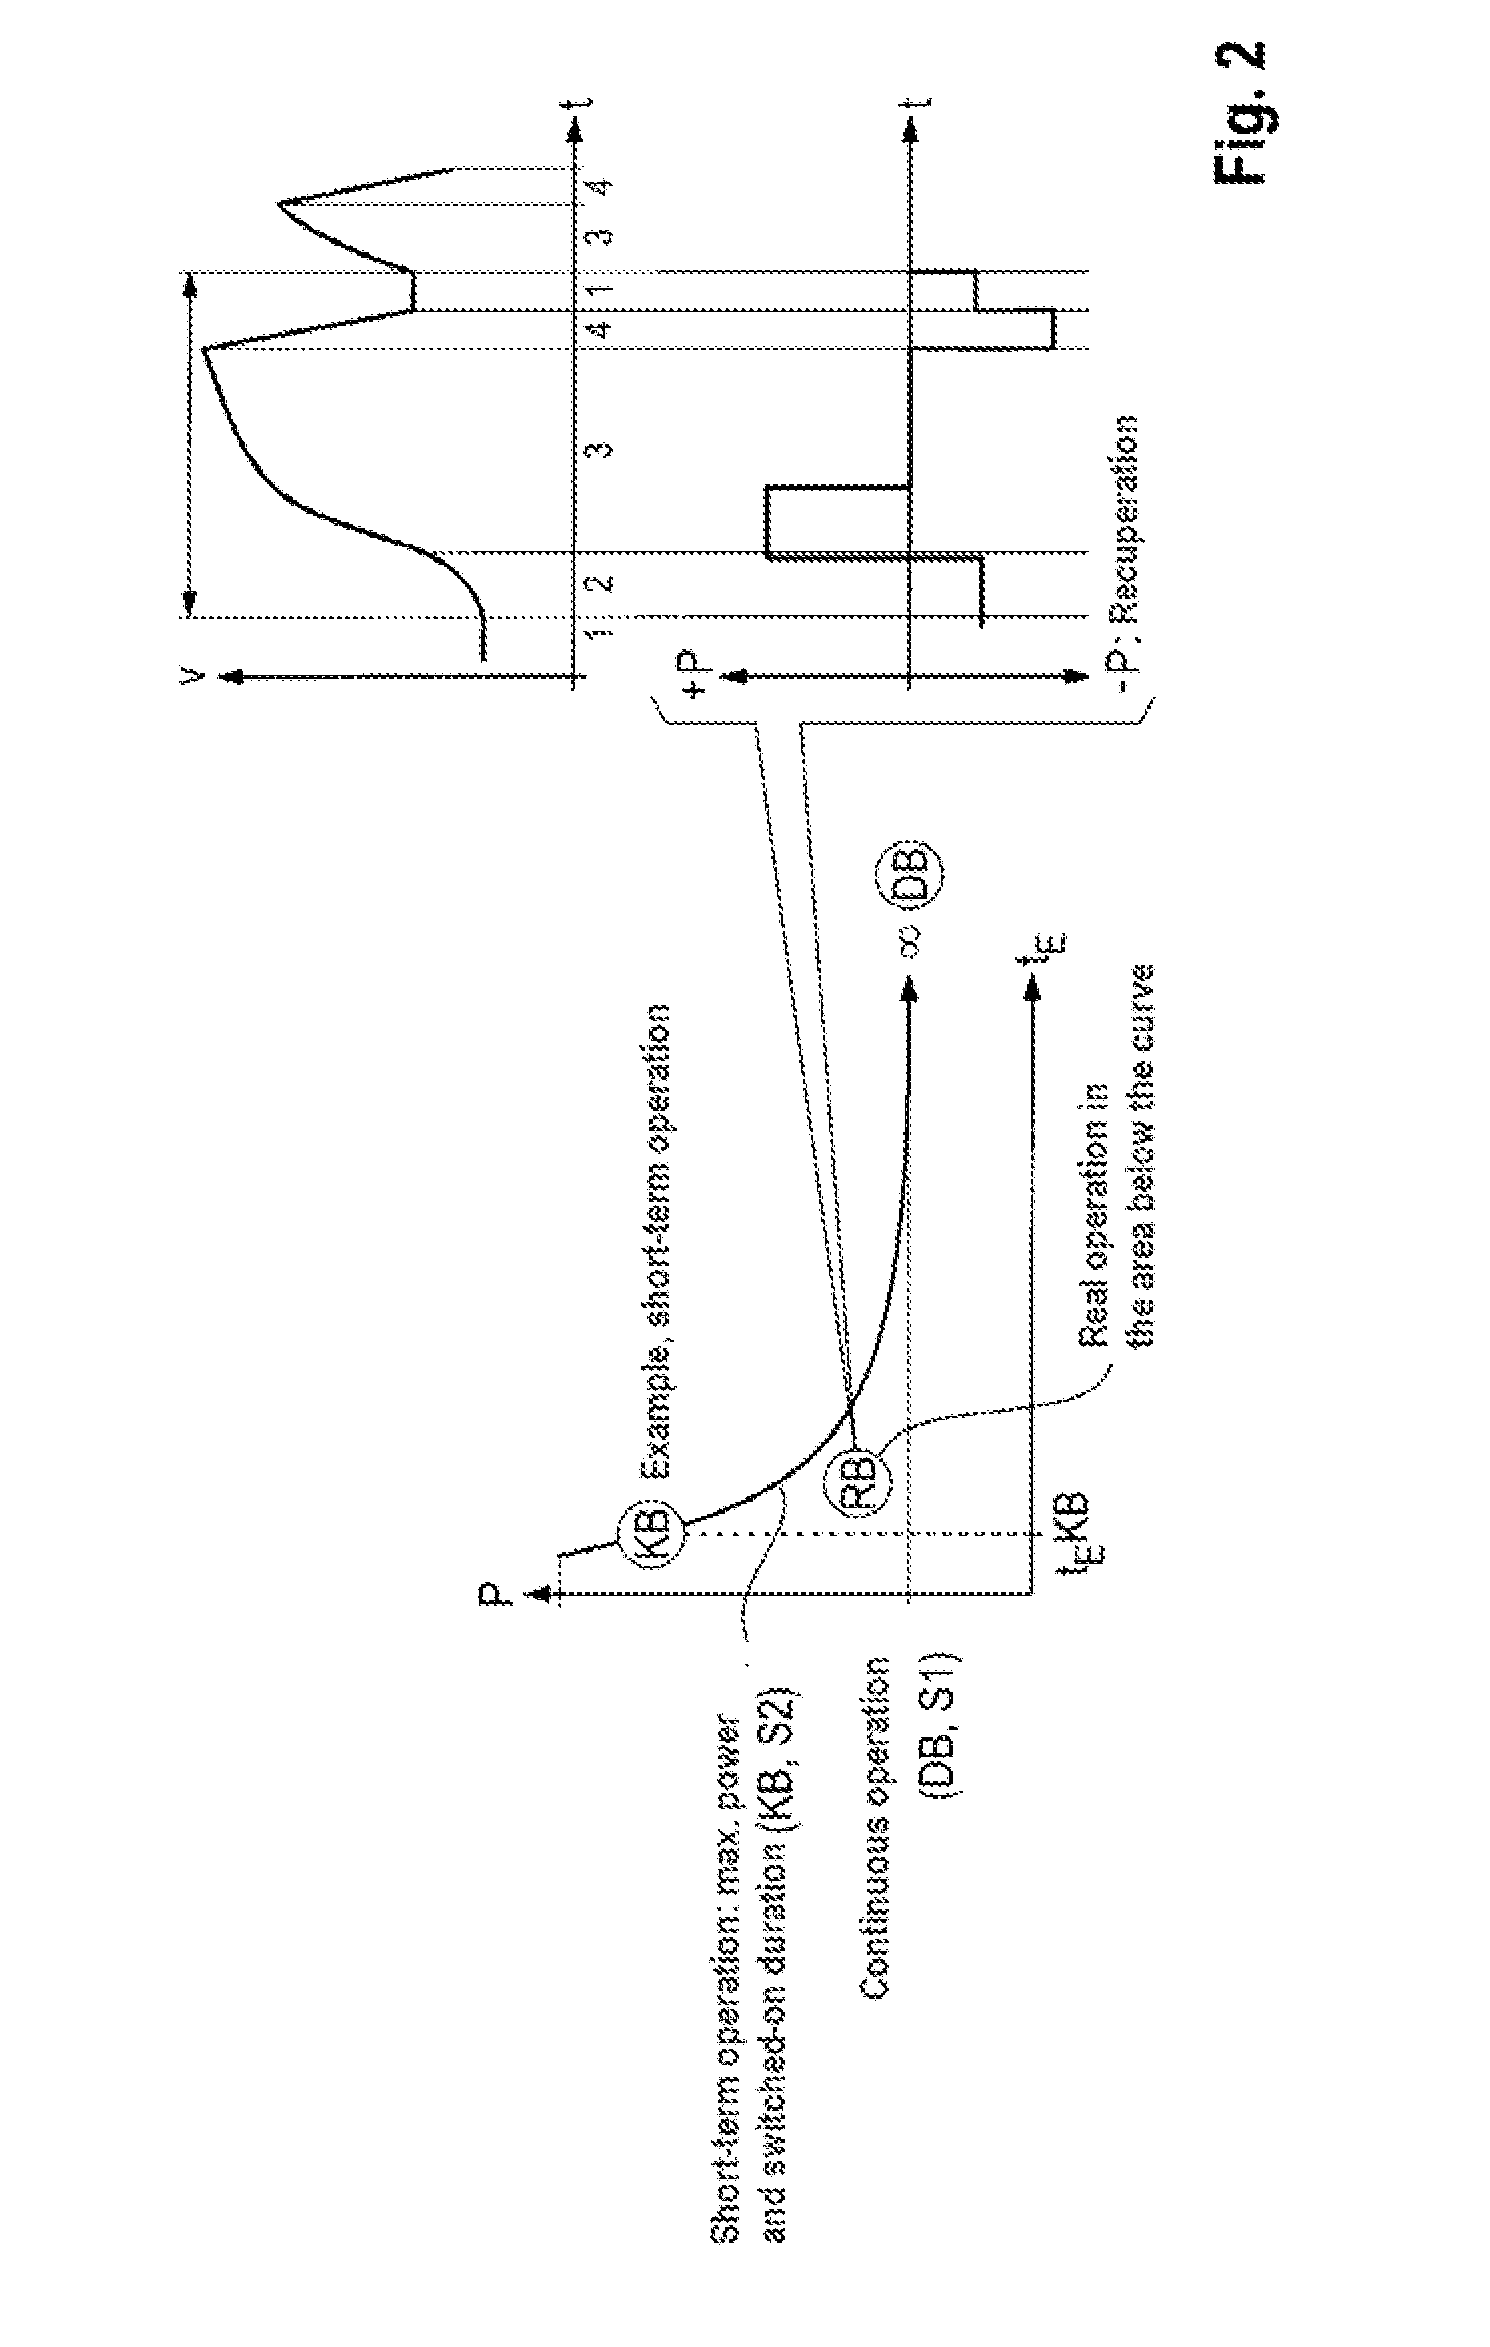 Operating method for a hybrid vehicle which is driven on a circuit